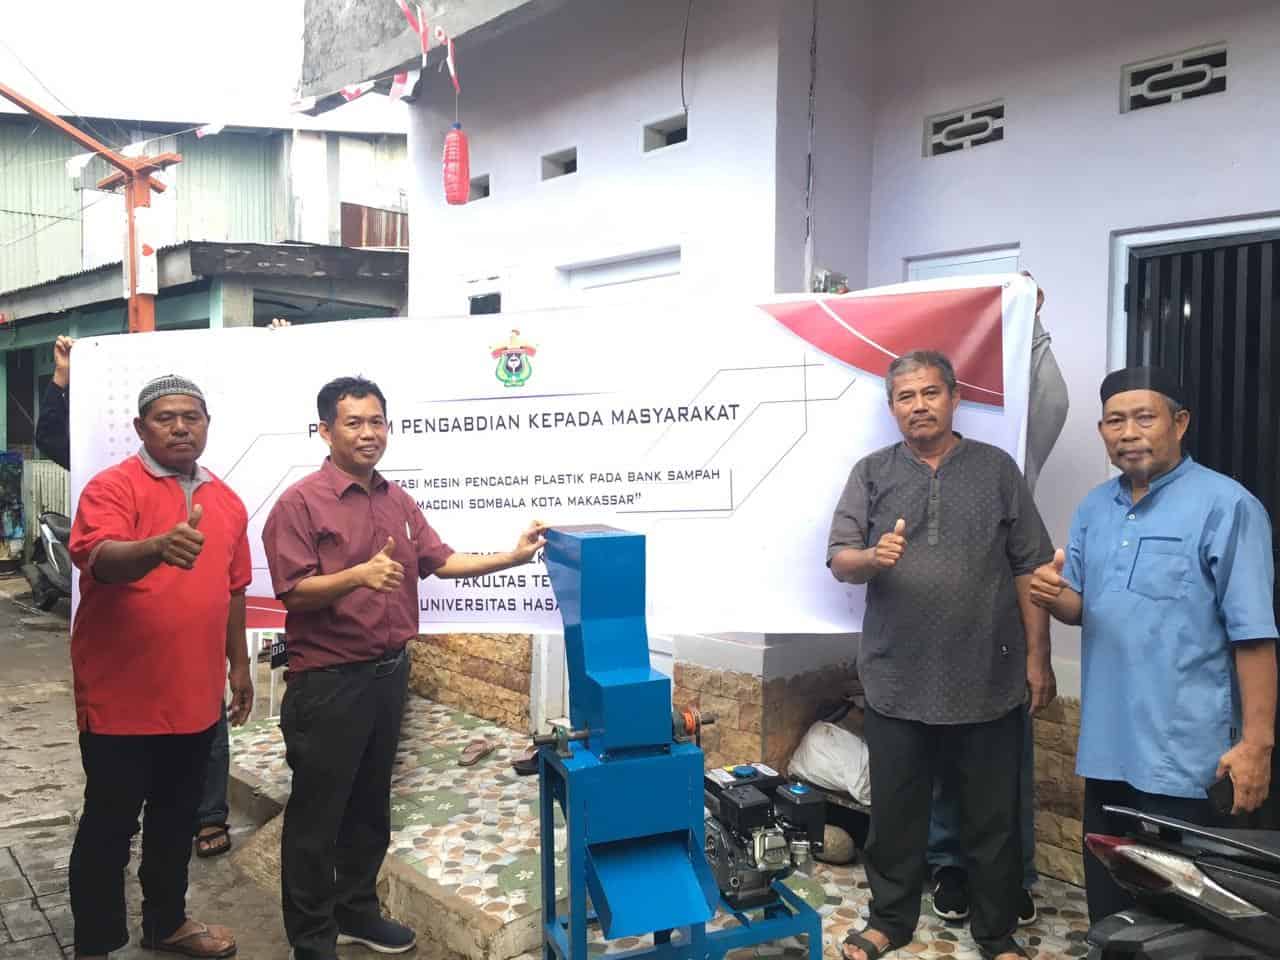 Community Participation in Strengthening Waste Management Systems in Makassar, Indonesia